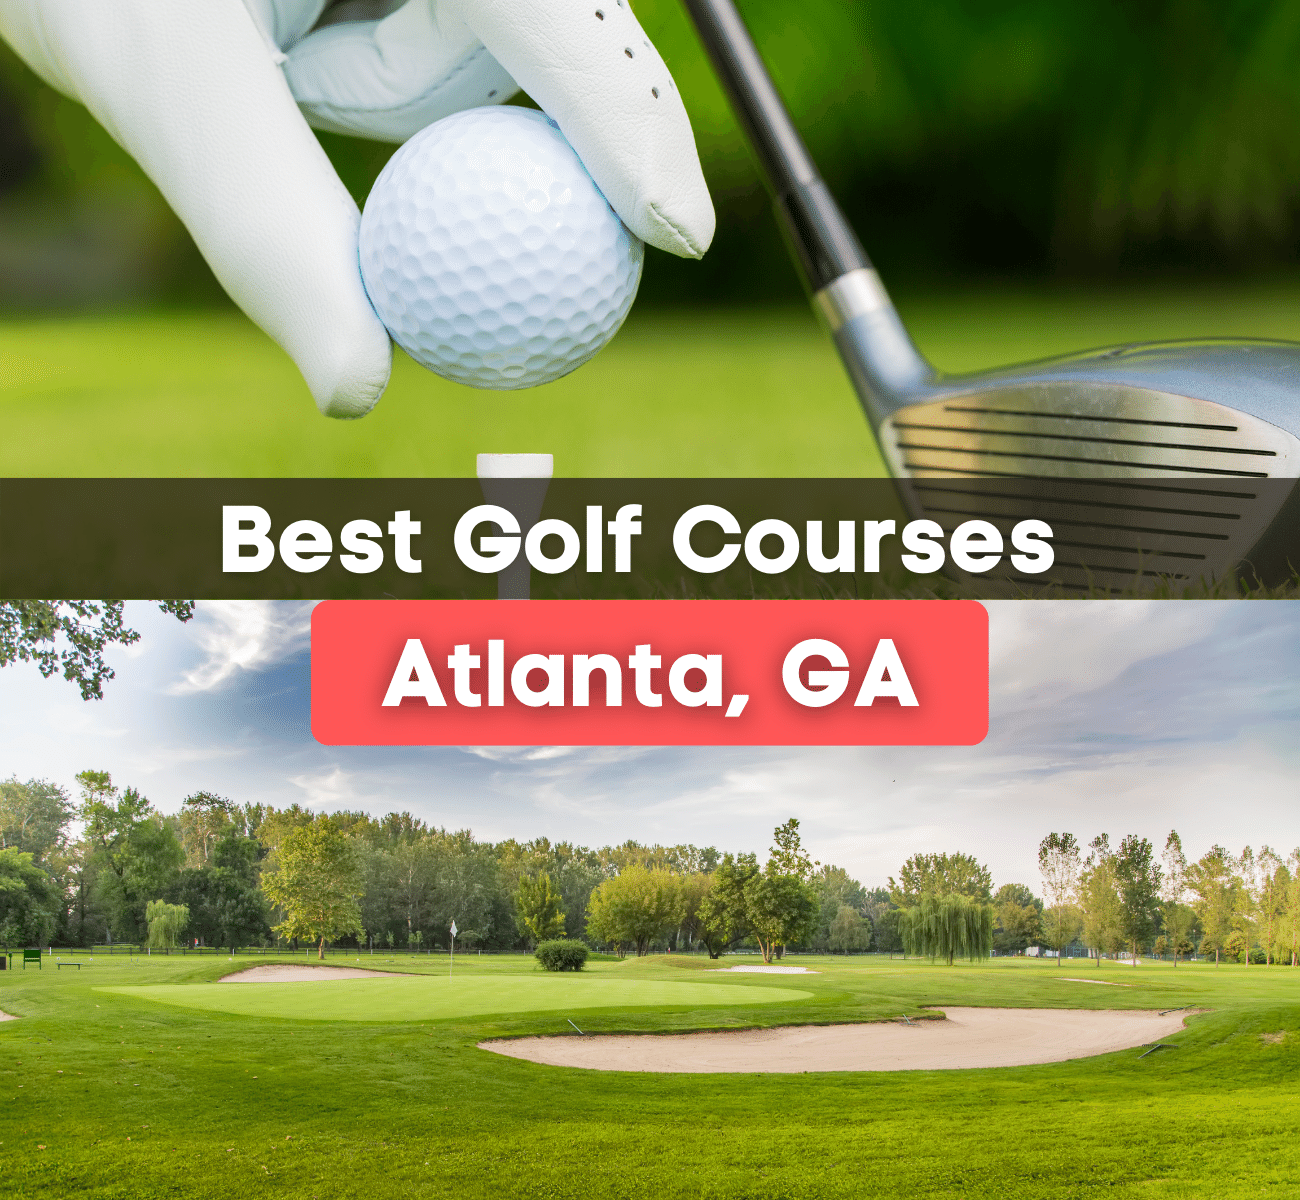 best golf courses in Atlanta, GA - placing golf ball on tee and golf course